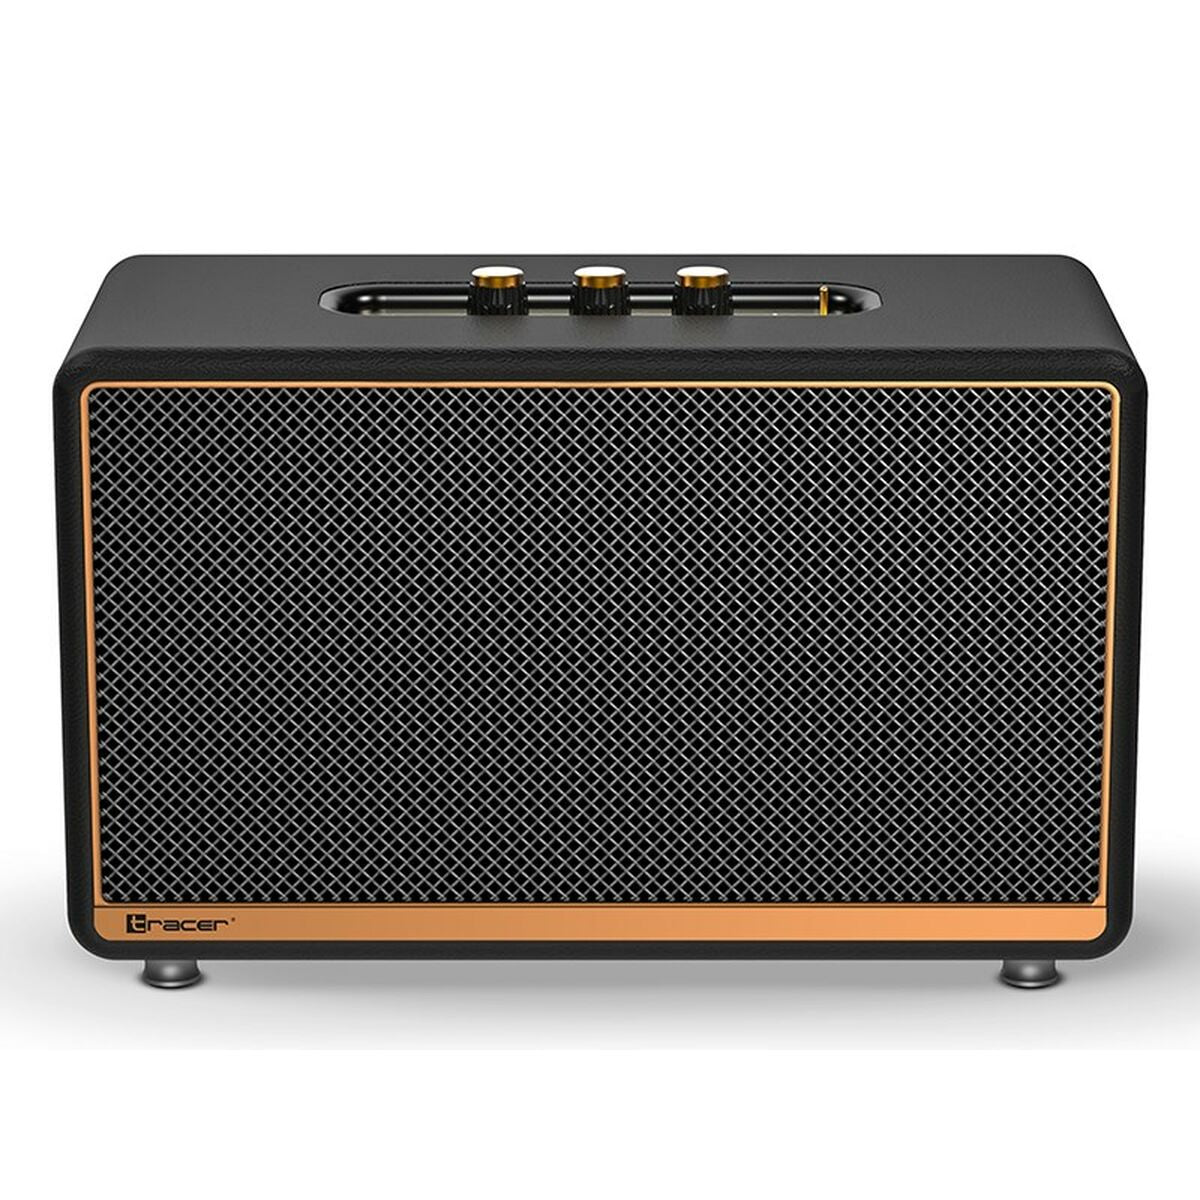 Portable Bluetooth Speakers Tracer M60 Black 60 W